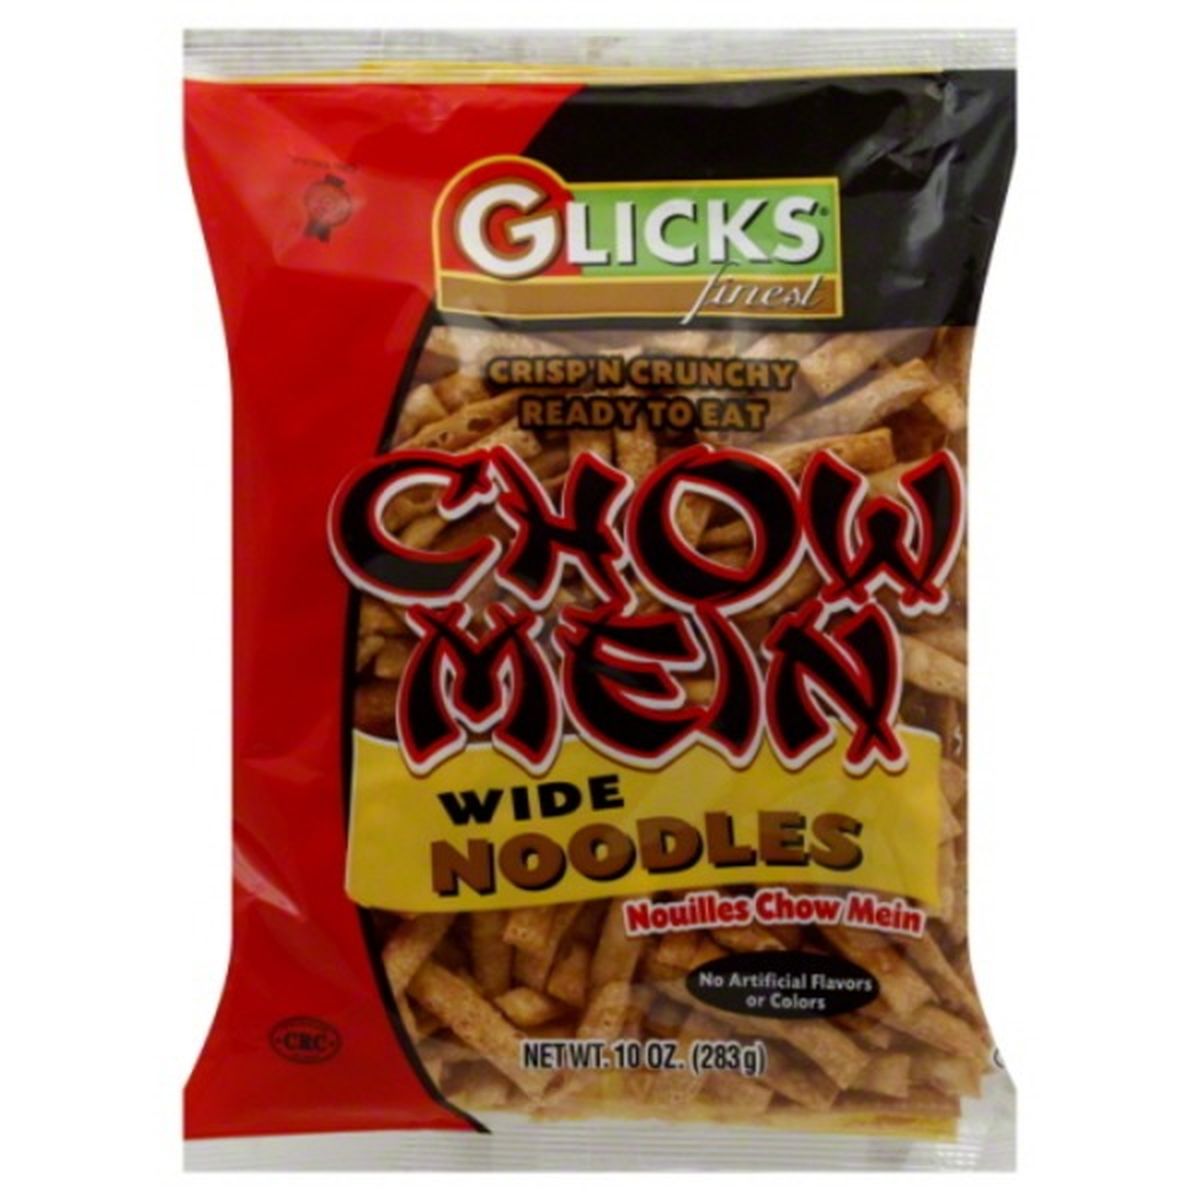 Calories in Glicks Noodles, Wide, Chow Mein